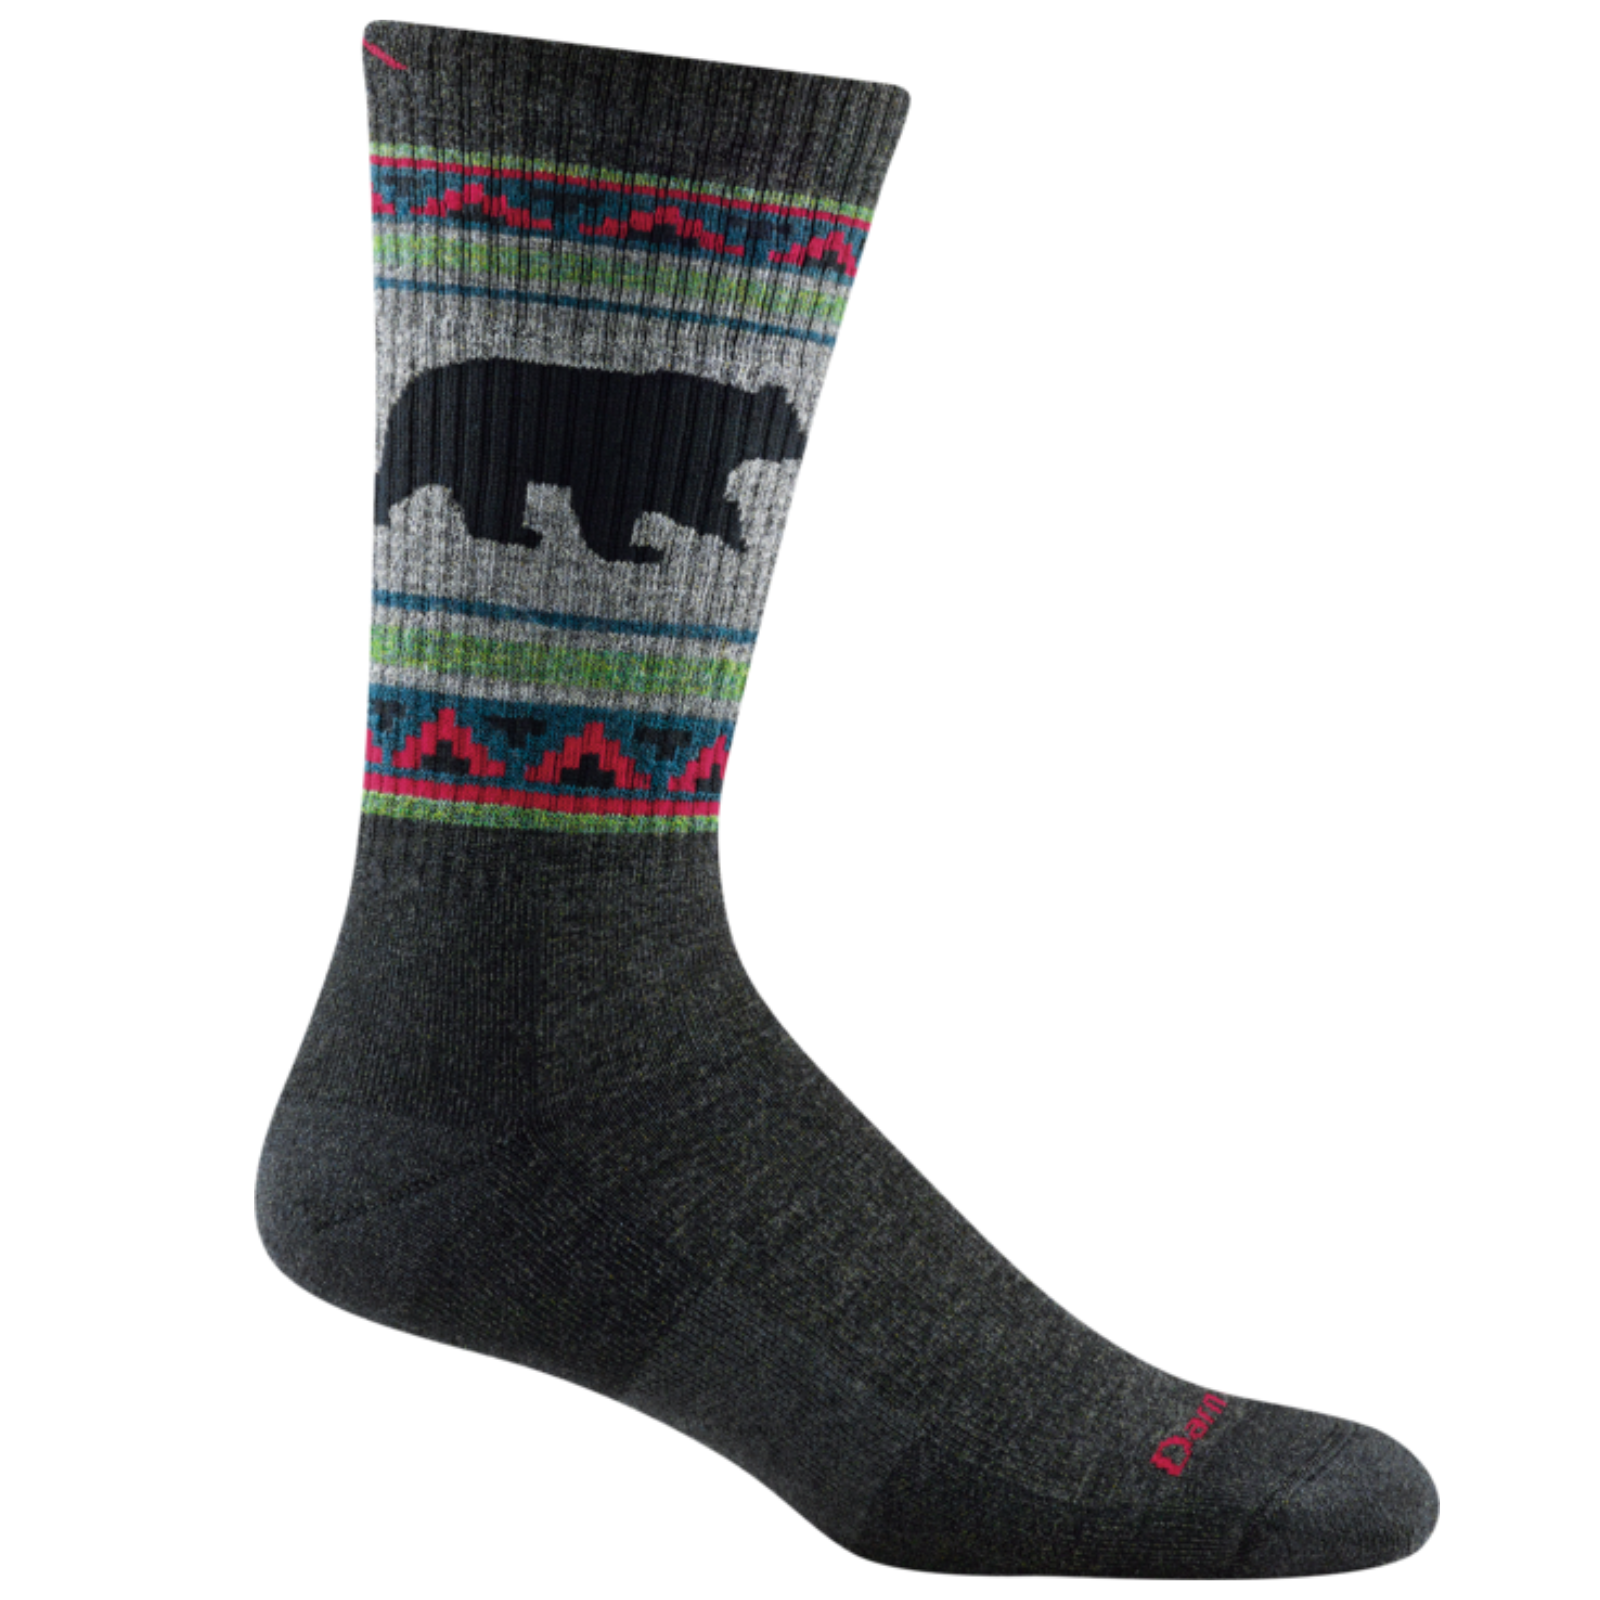 Darn Tough 1980 VanGrizzle Hiker Boot with Full Cushion Midweight Men's Crew Sock featuring charcoal sock with gray, green, red, and blue pattern around ankle with black bear. Sock shown on display foot. 